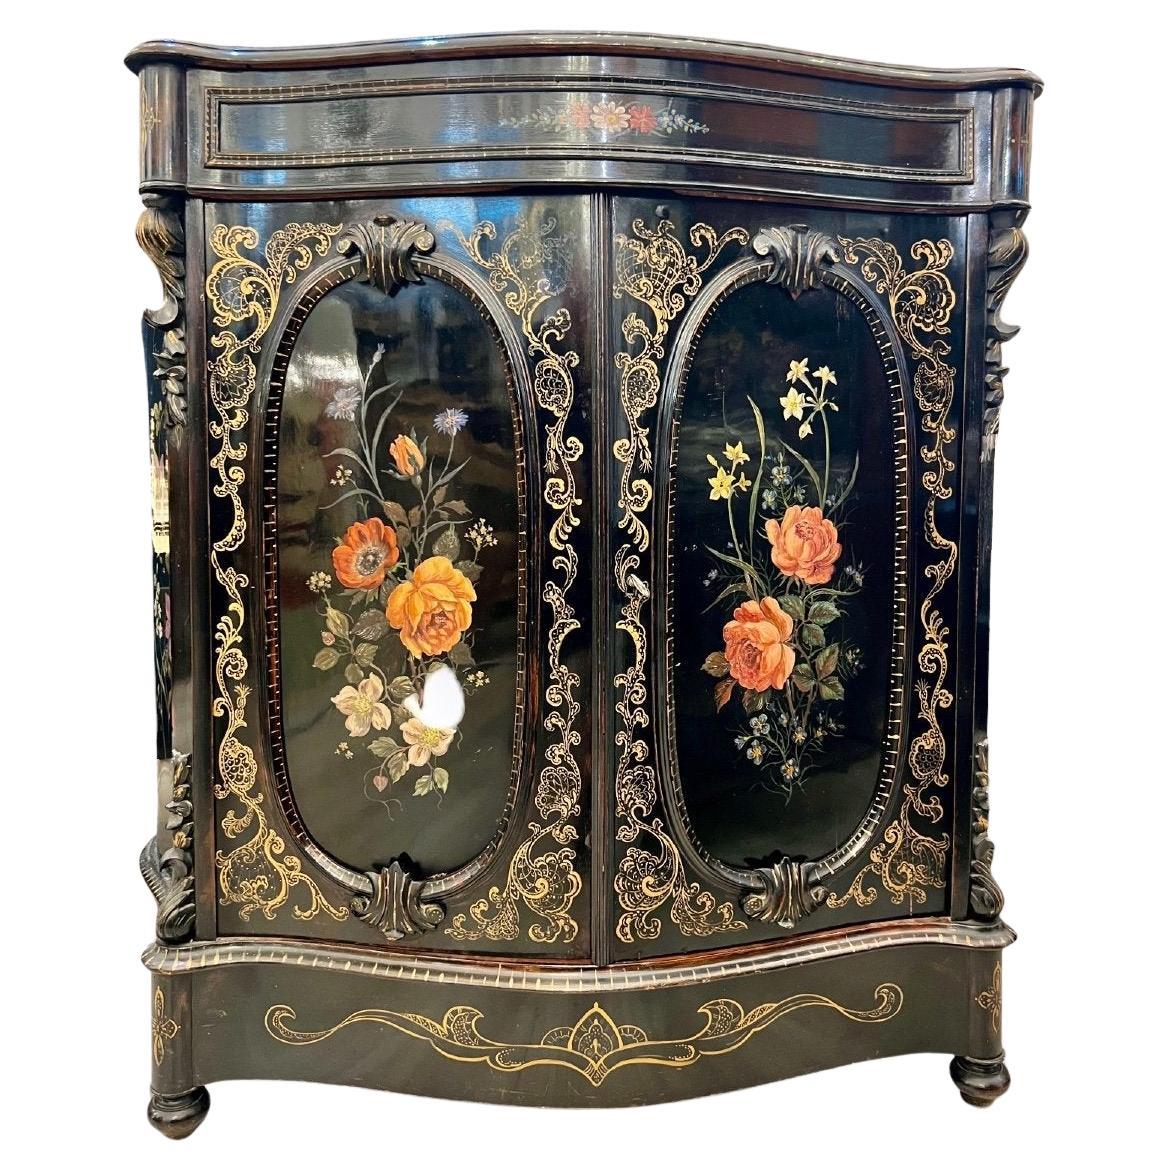 19th Century Napoleon III 'Meuble d'Appui' Buffet in Black Lacquered Wood